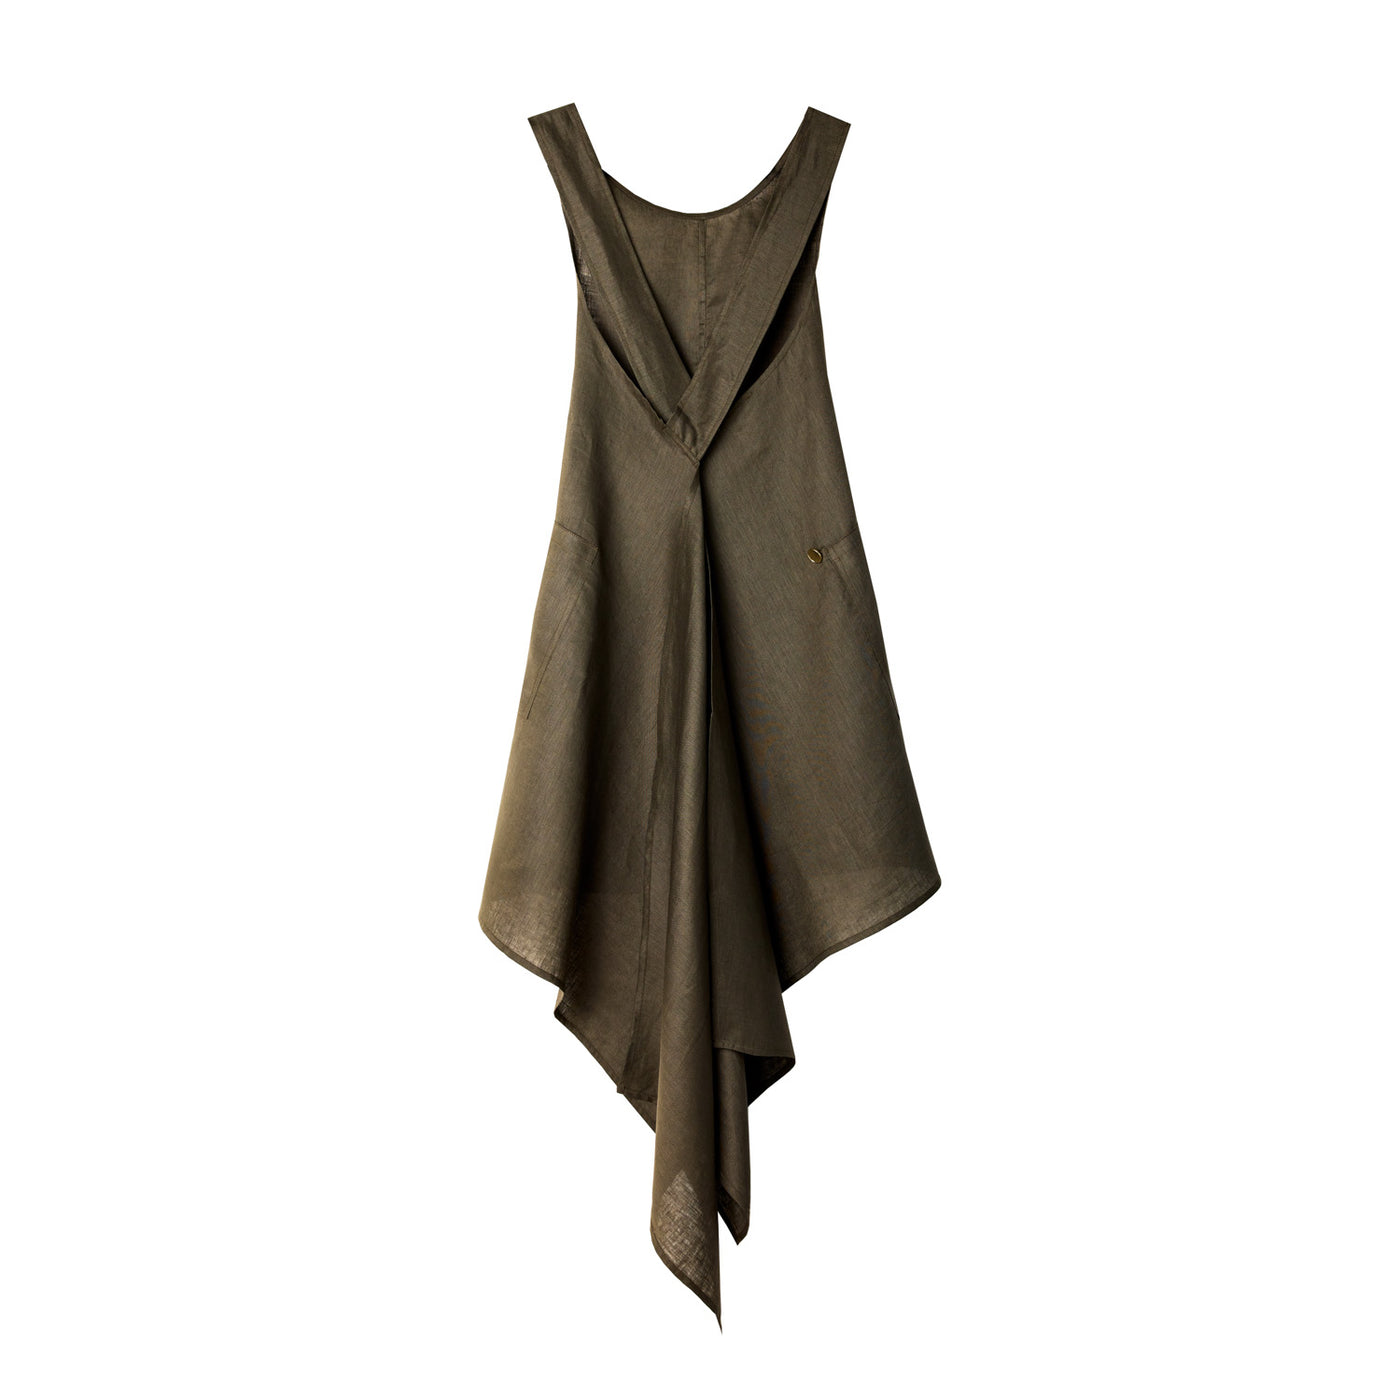 Apron in Olive Green